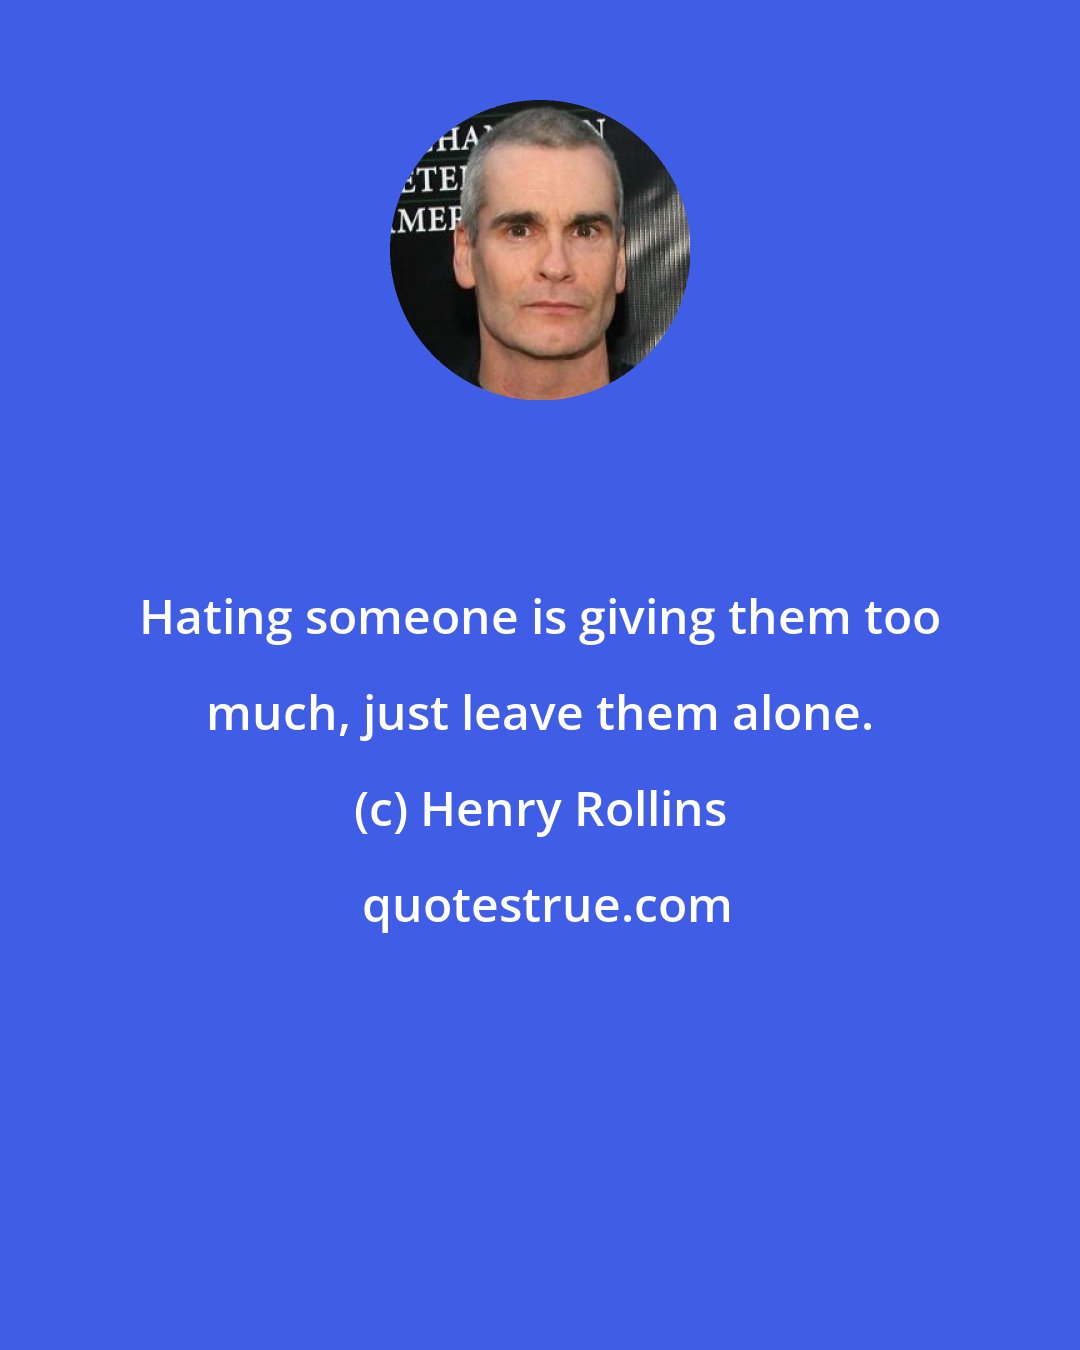 Henry Rollins: Hating someone is giving them too much, just leave them alone.